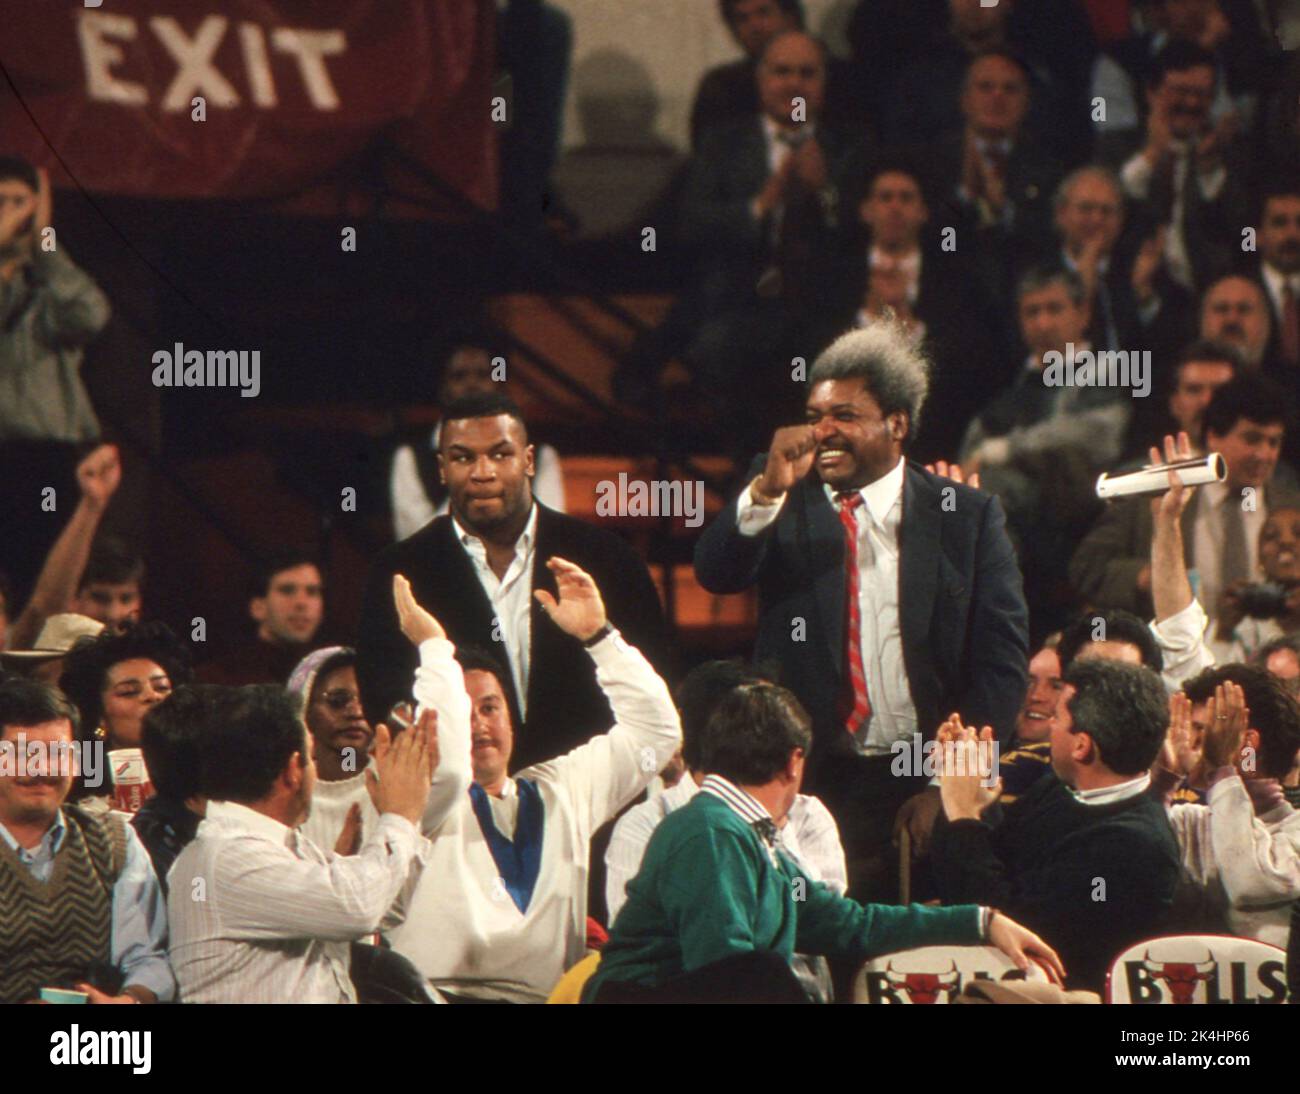 Boxing promoter Don King and heavyweight boxing champion Mike Tyson wave to the crowd while attending a Chicago Bulls basketball game, ca. 1990 Stock Photo